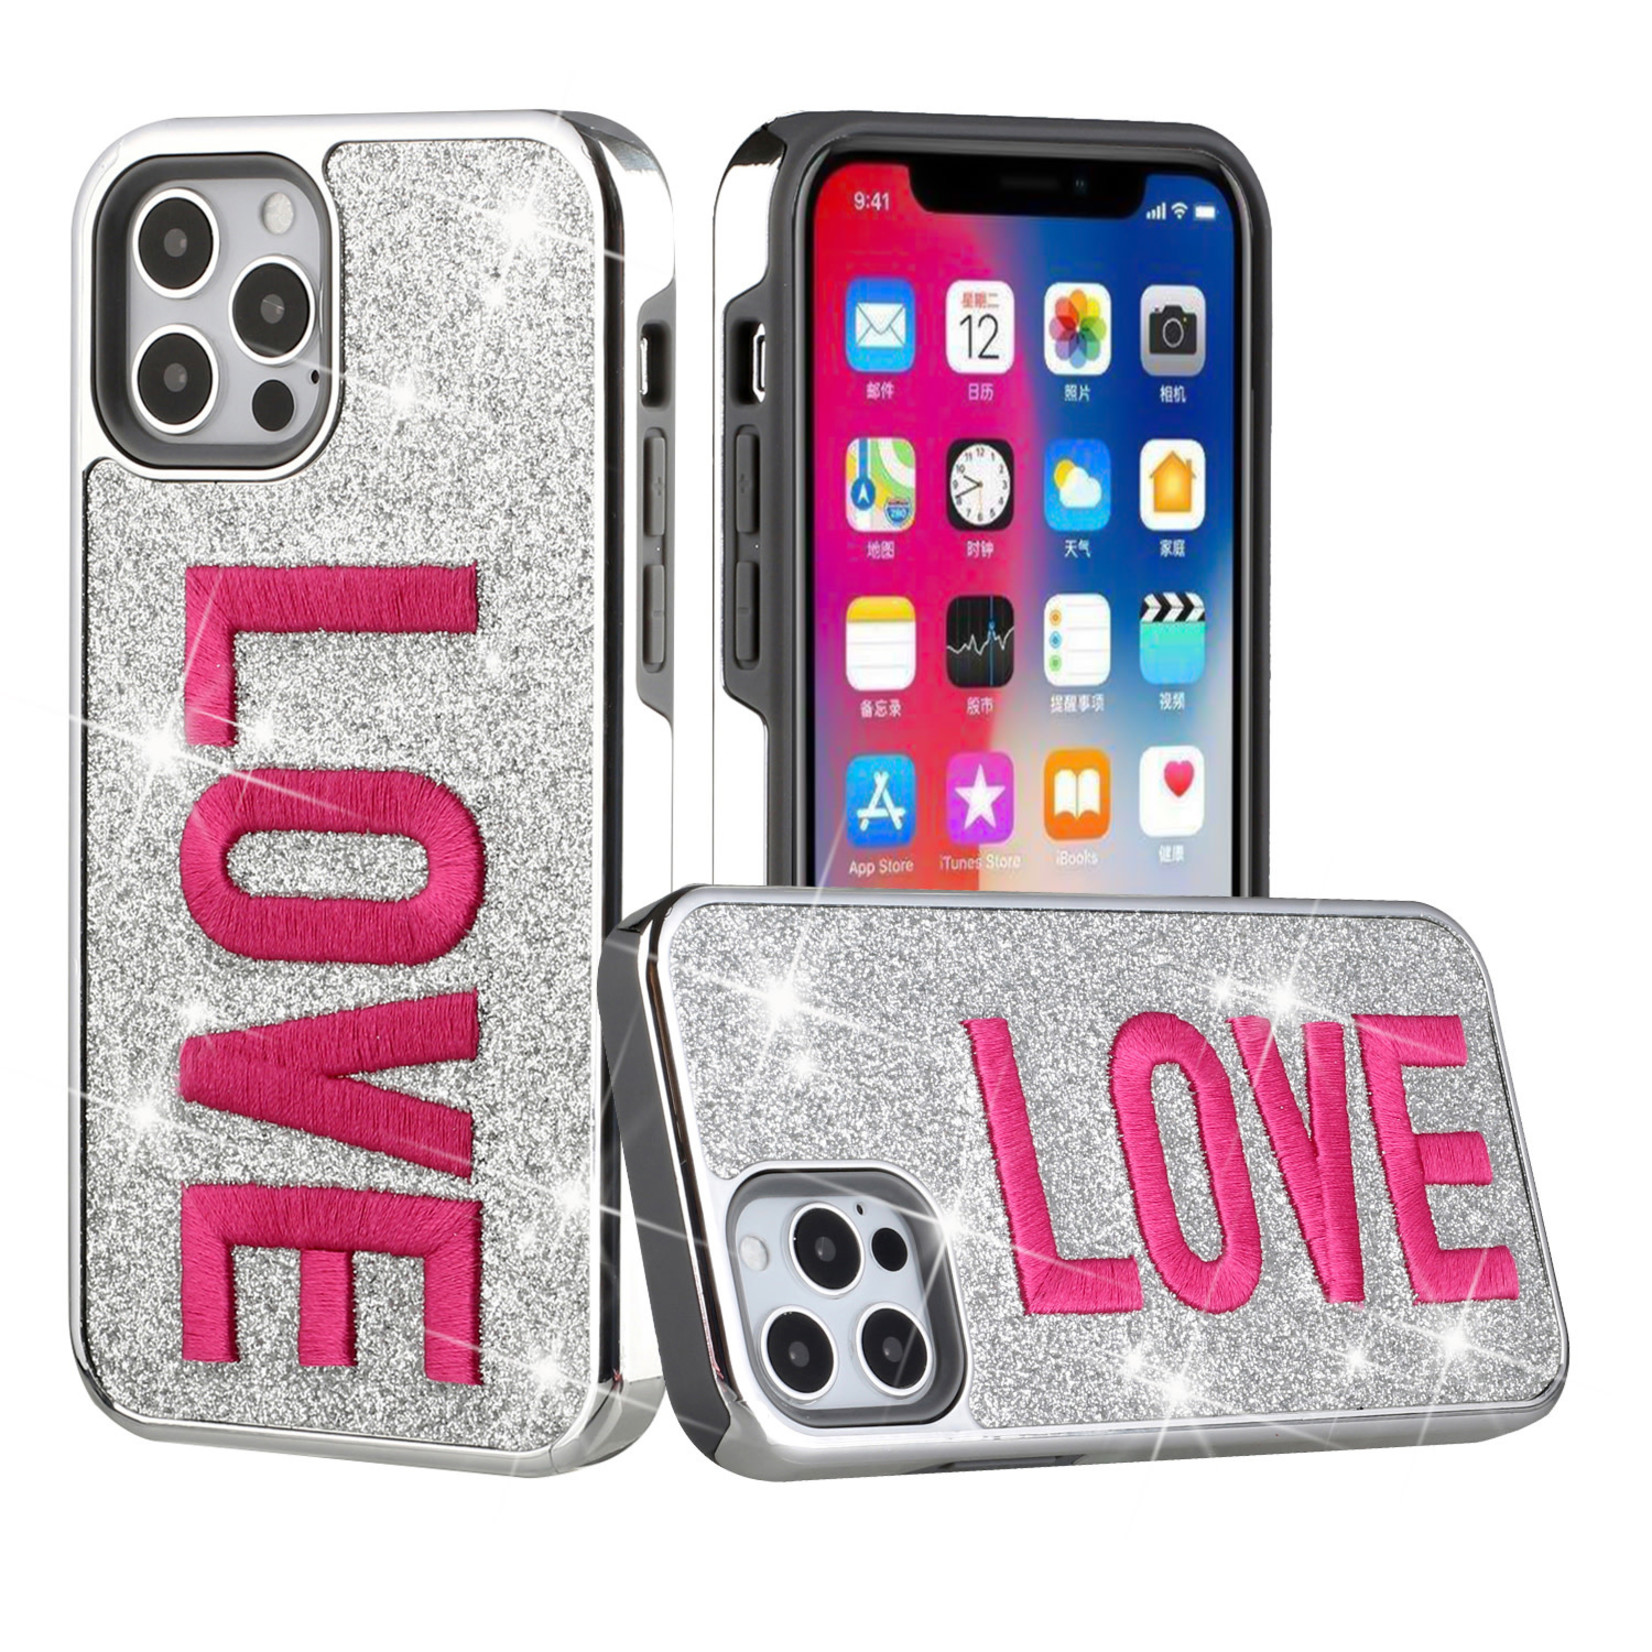 Embroidery Bling Glitter Chrome Hybrid Case Cover - Love on Silver For Apple iPhone 11 (XI6.1)